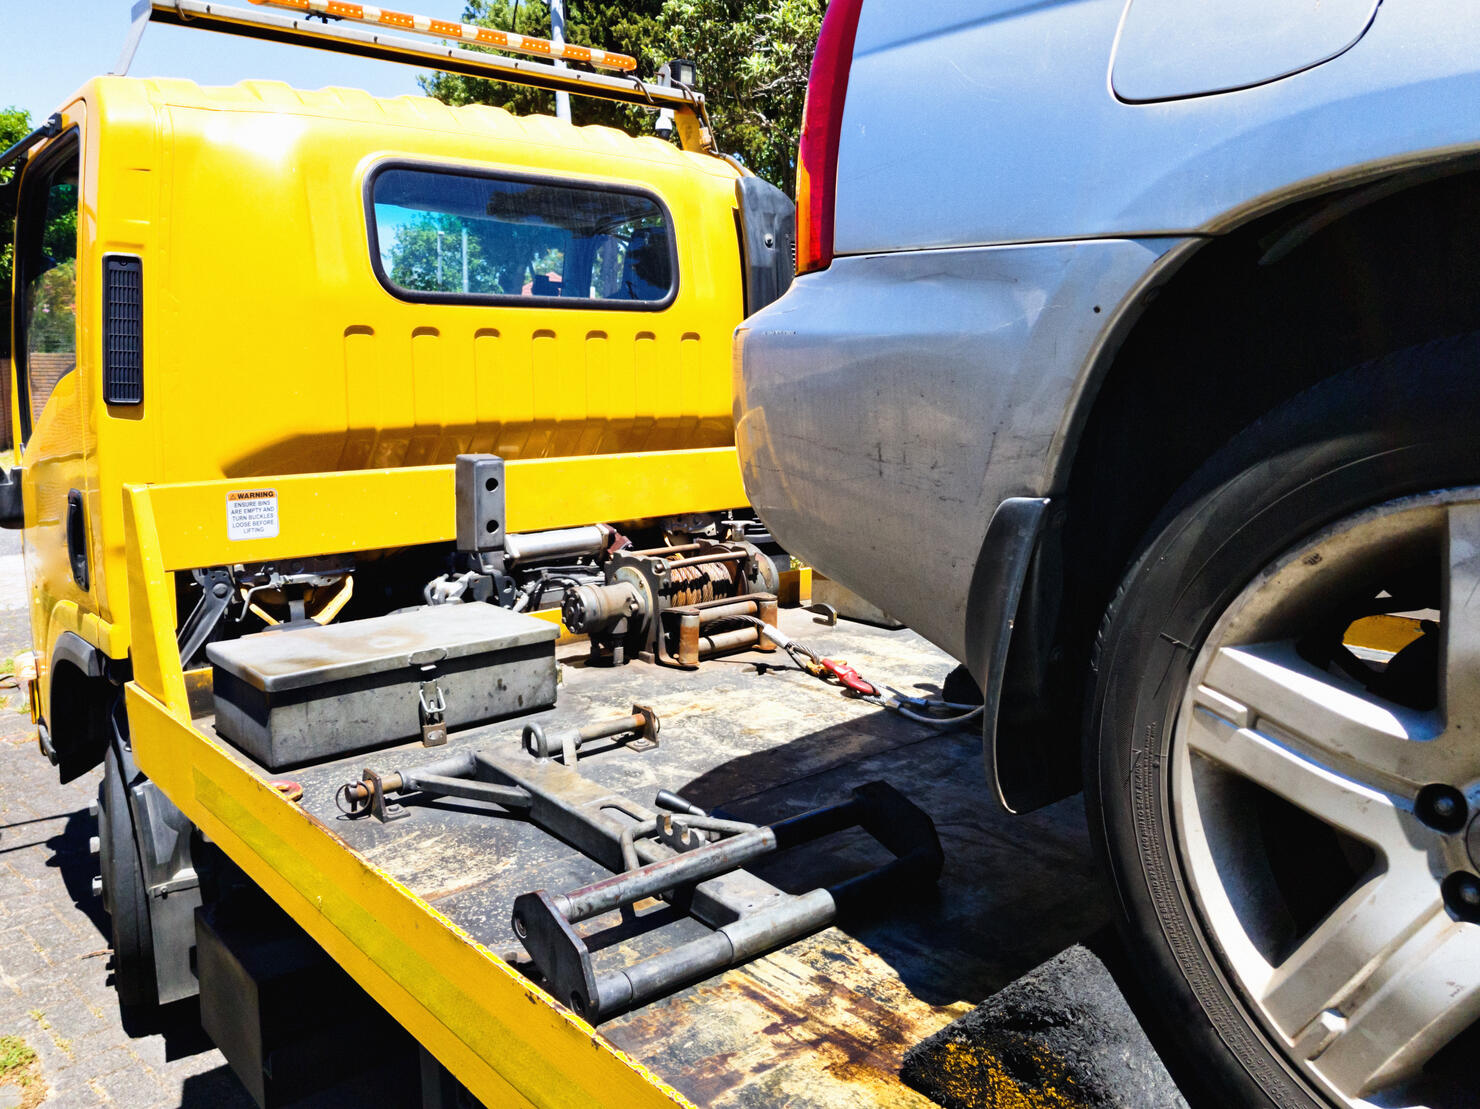 Car being secured to a flatbed tow truck after breakdown